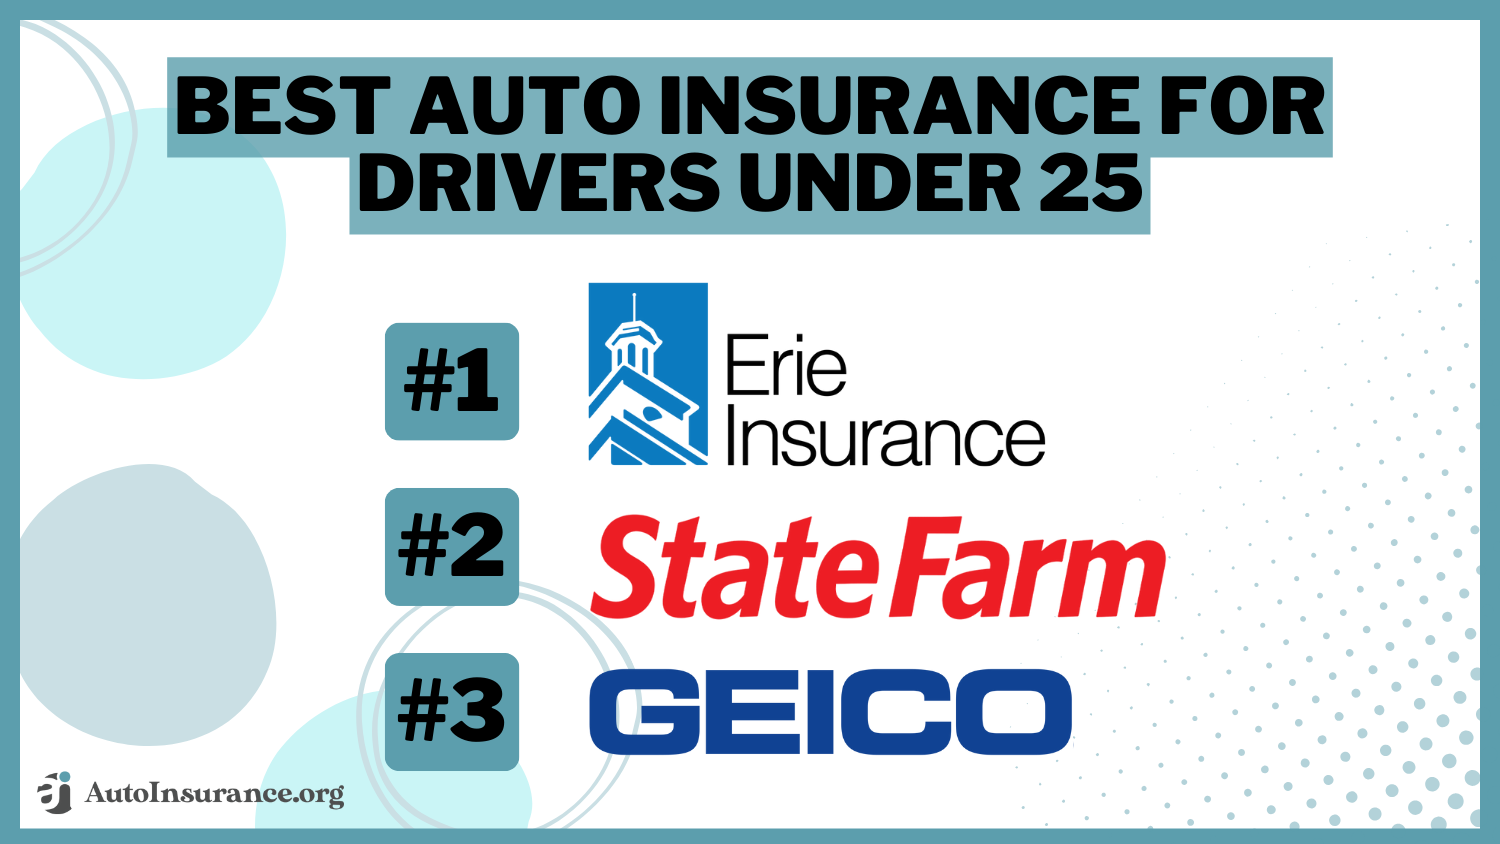 Best Auto Insurance for Drivers Under 25 (Find the Top 10 Companies Here!)